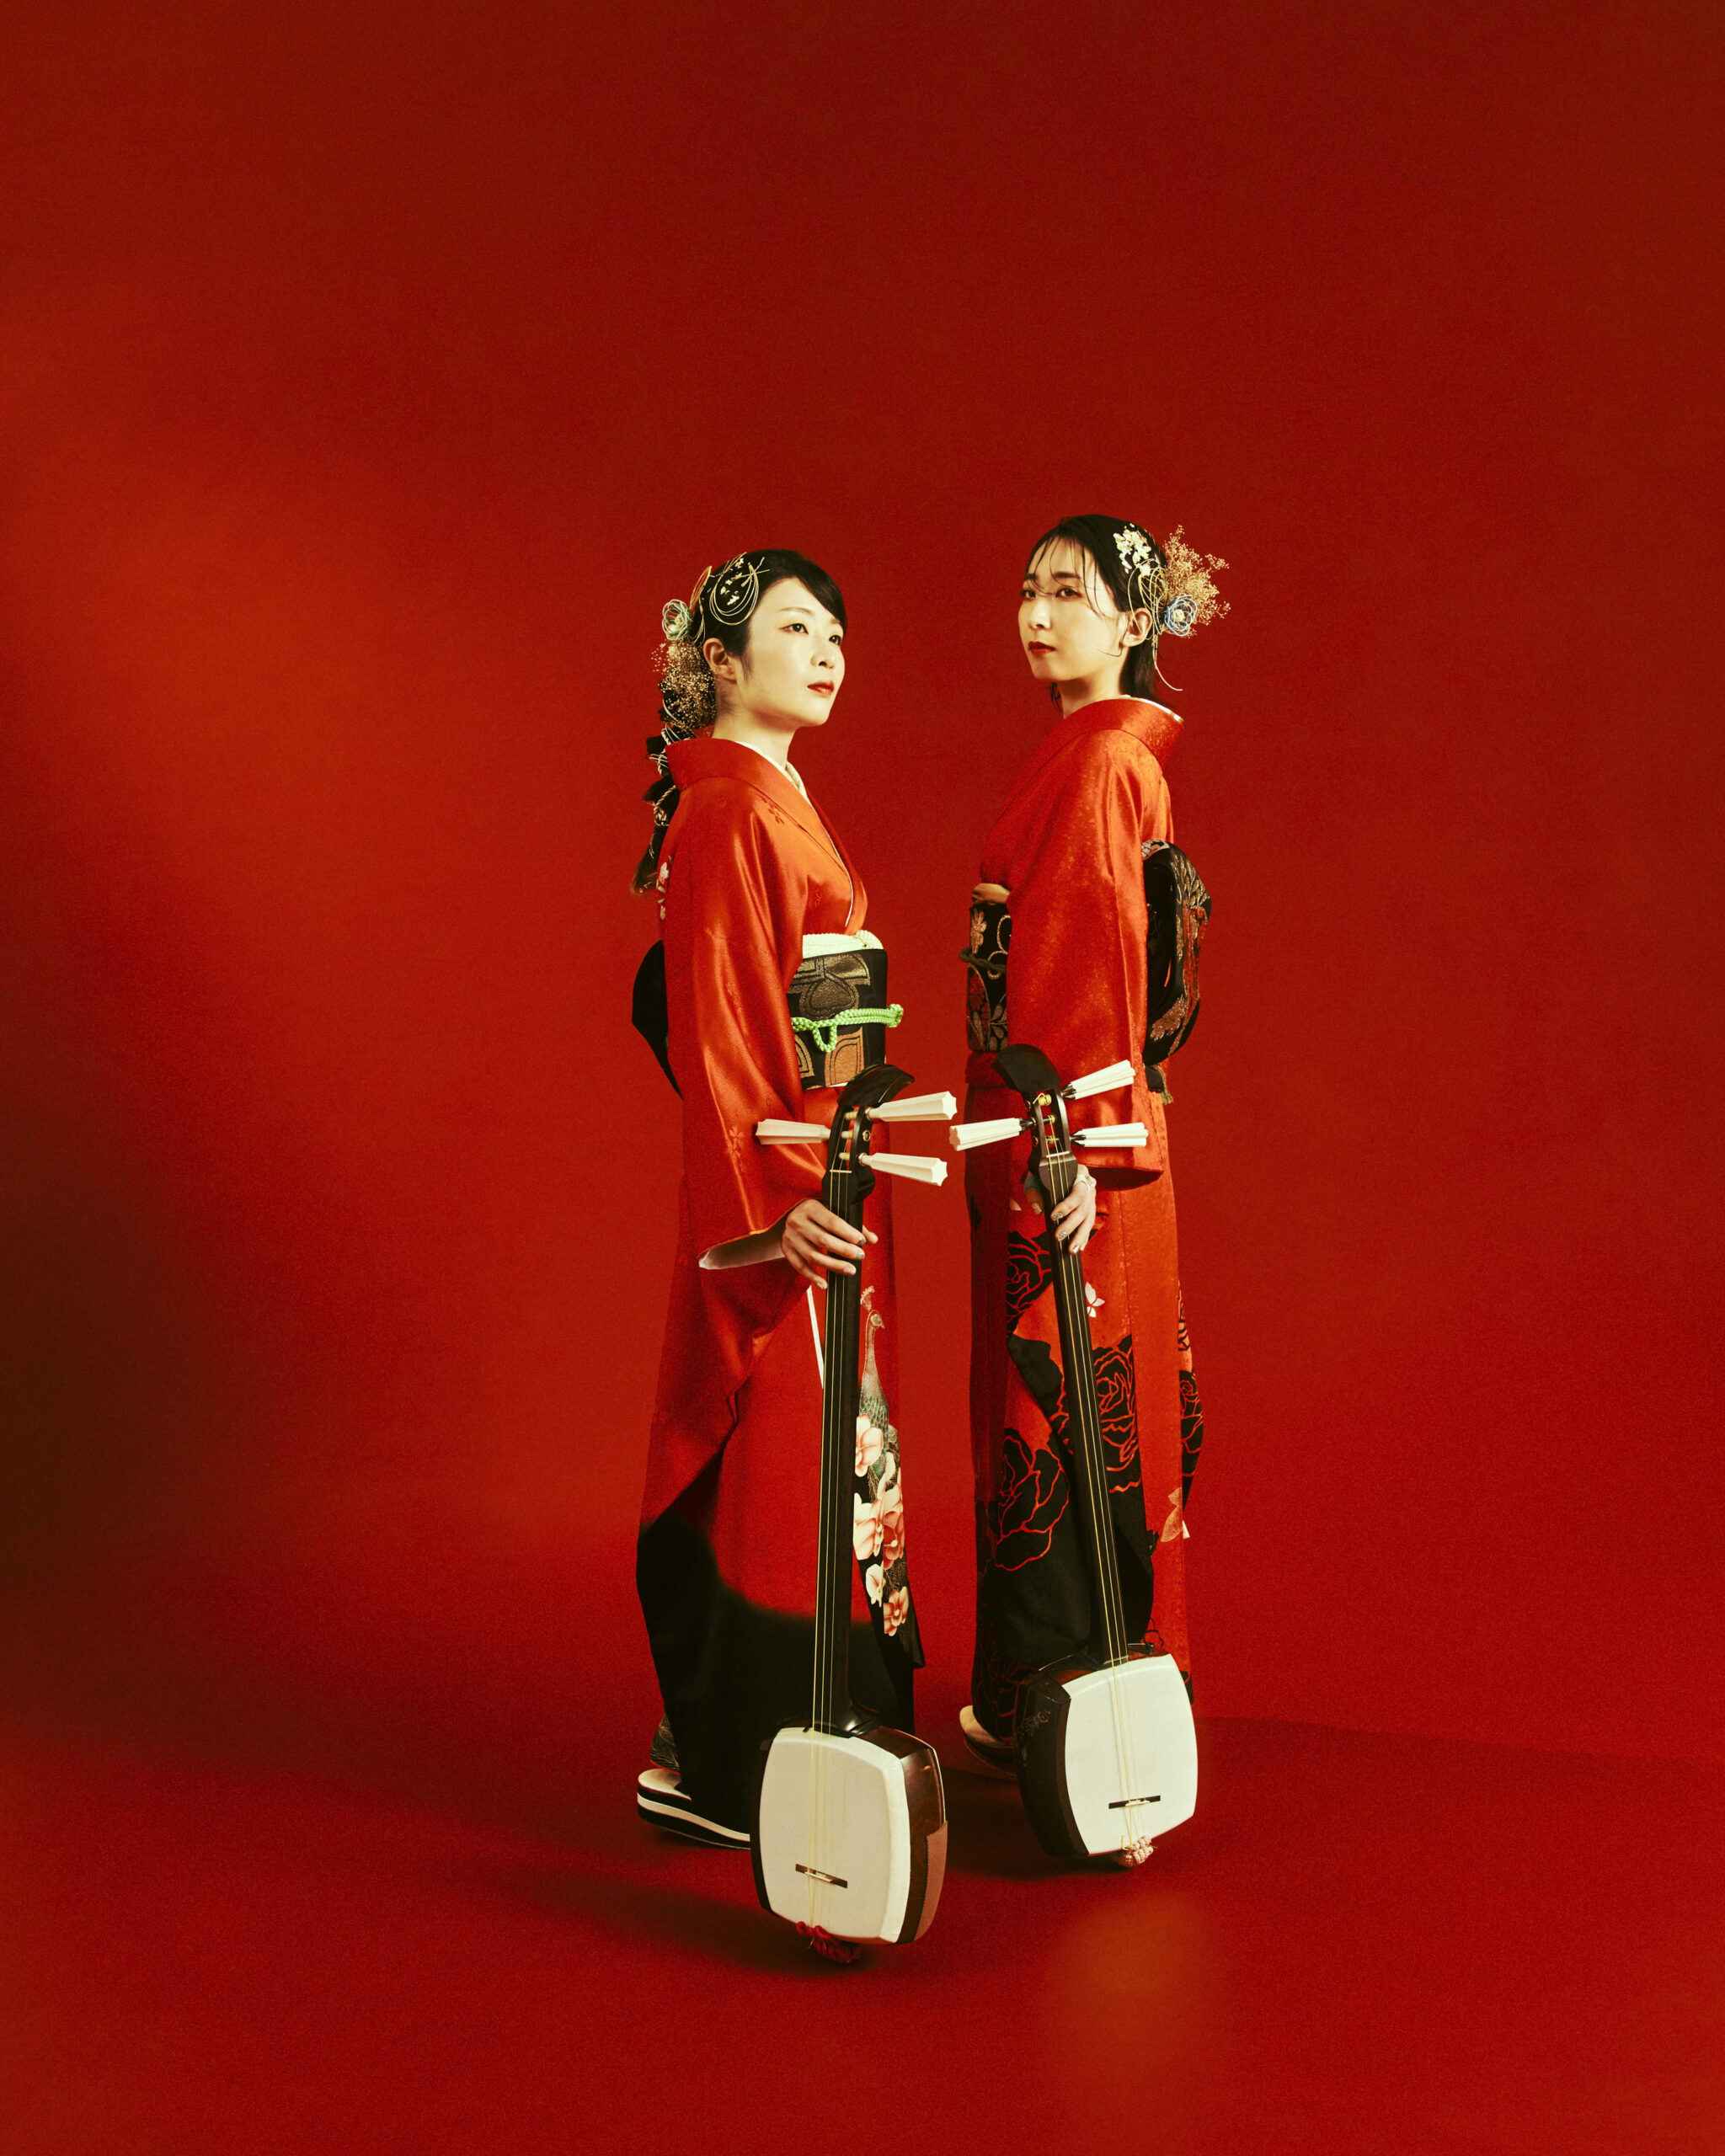 the two members of KiKi stand in red kimono against a red background